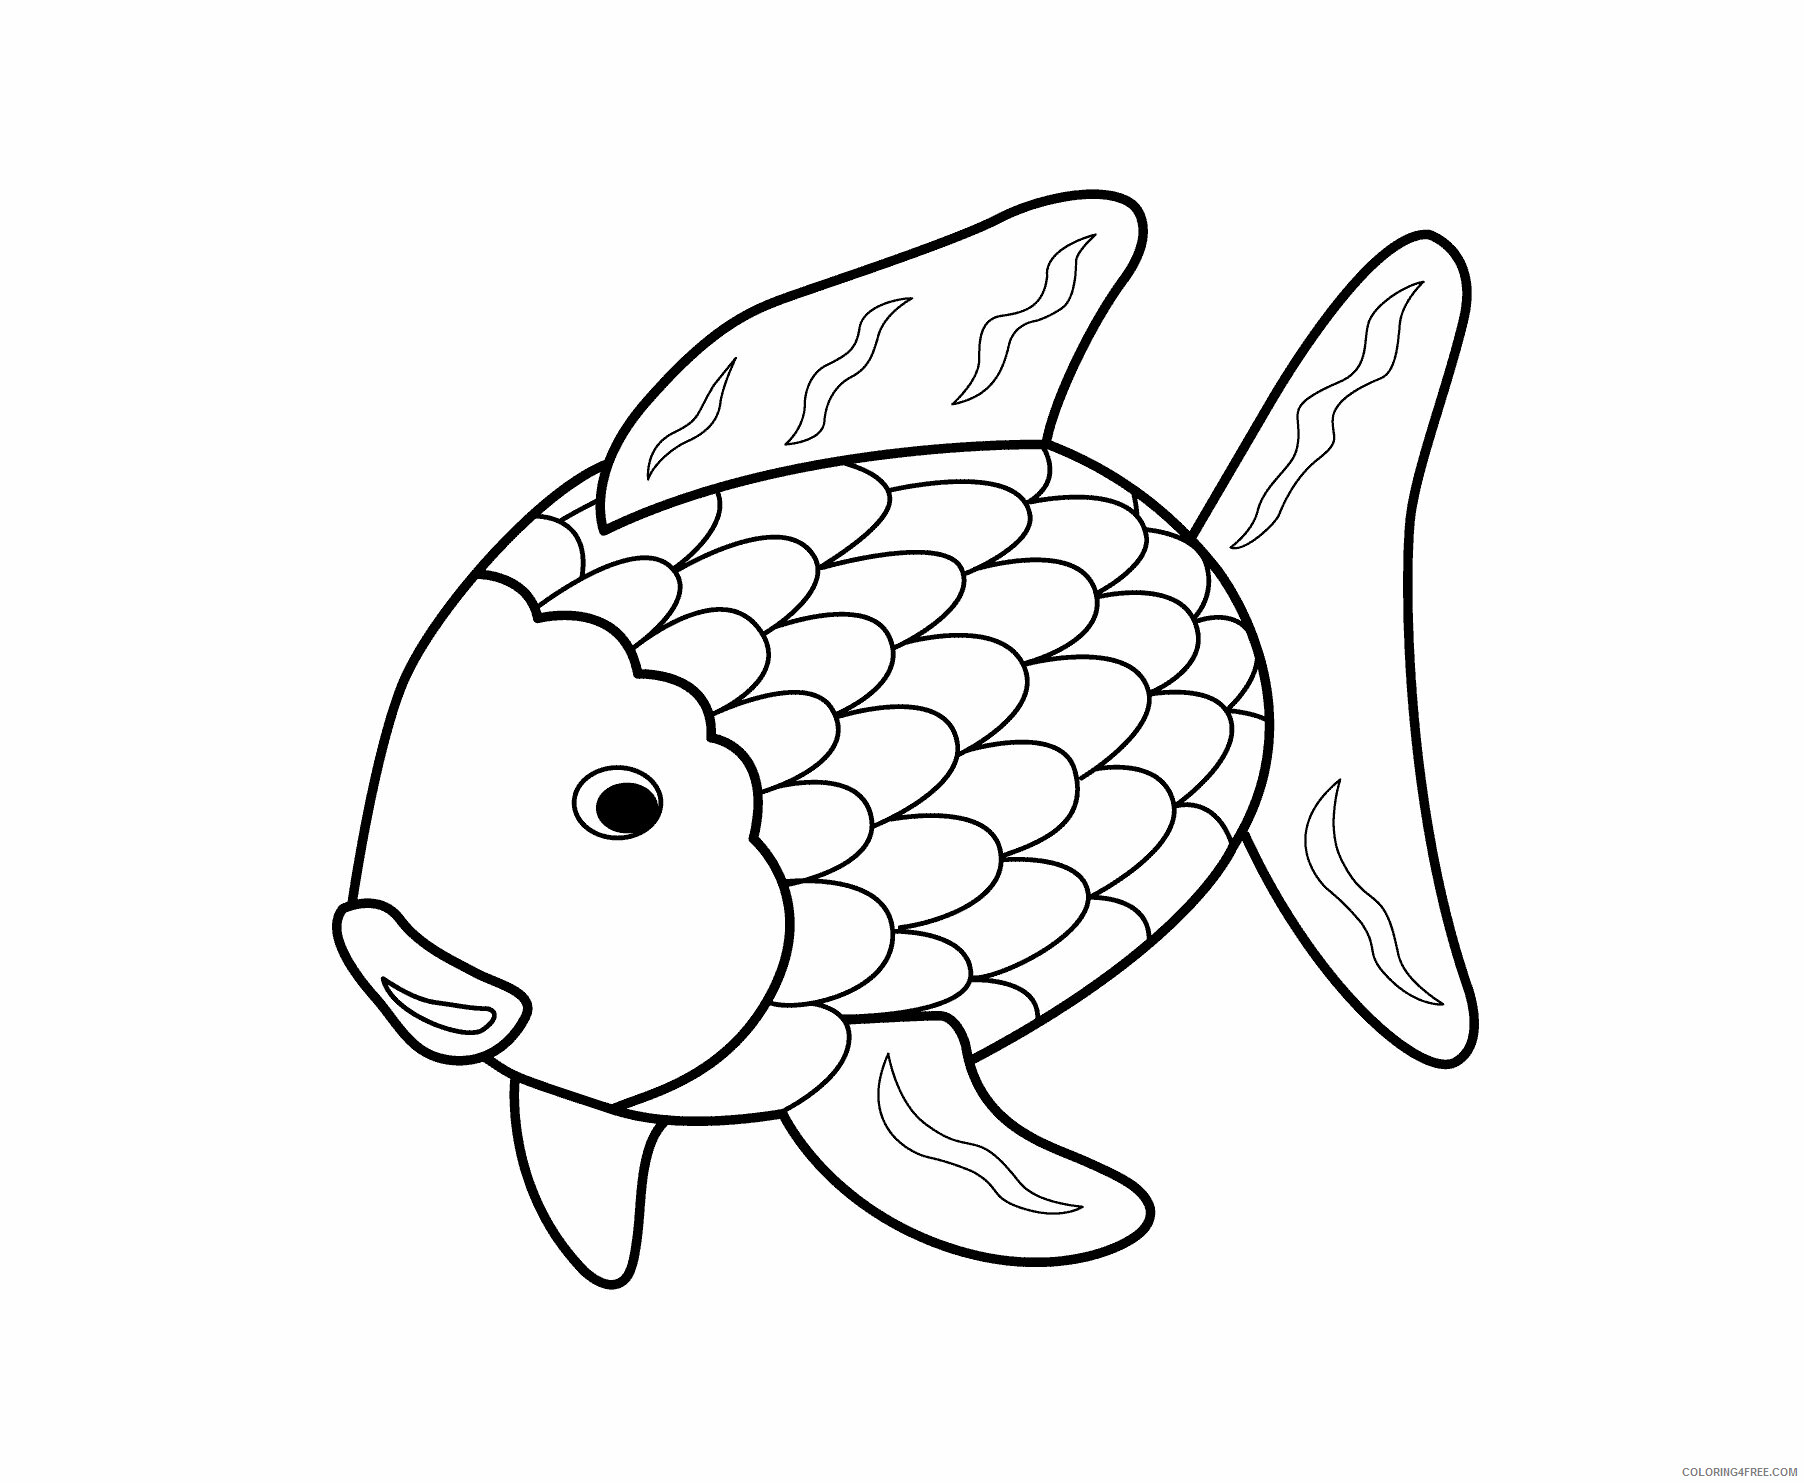 Animal Coloring Pages of Ocean Animals Printable Sheets amazing realistic jungle 2021 a Coloring4free